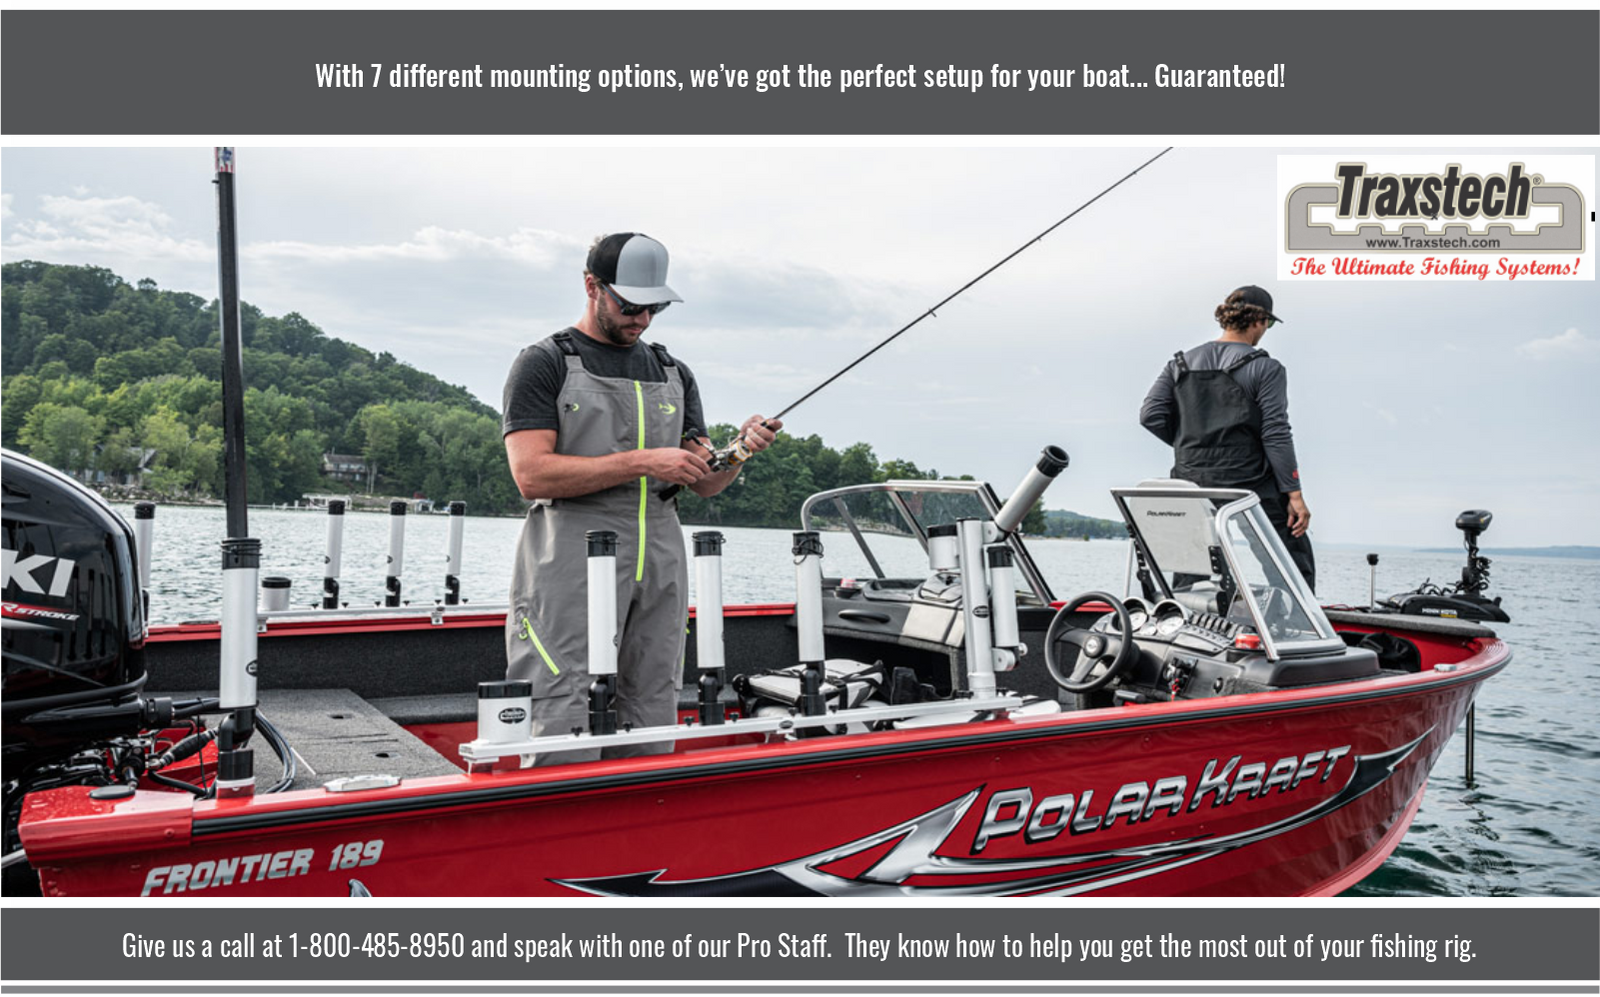 Boat and Tackle Premium Fishing Gear